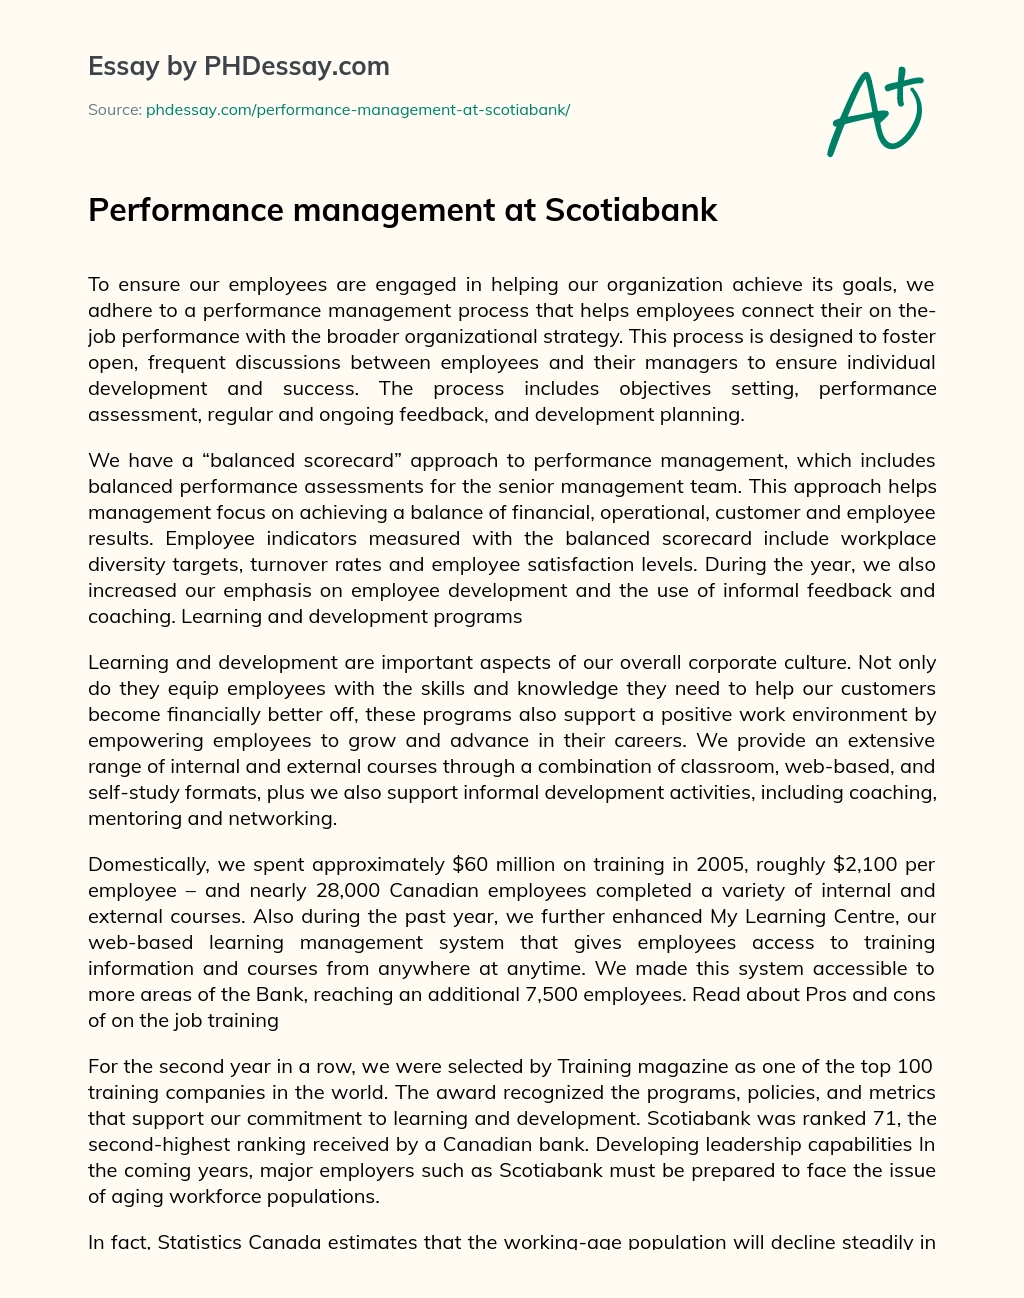 Performance management at Scotiabank essay